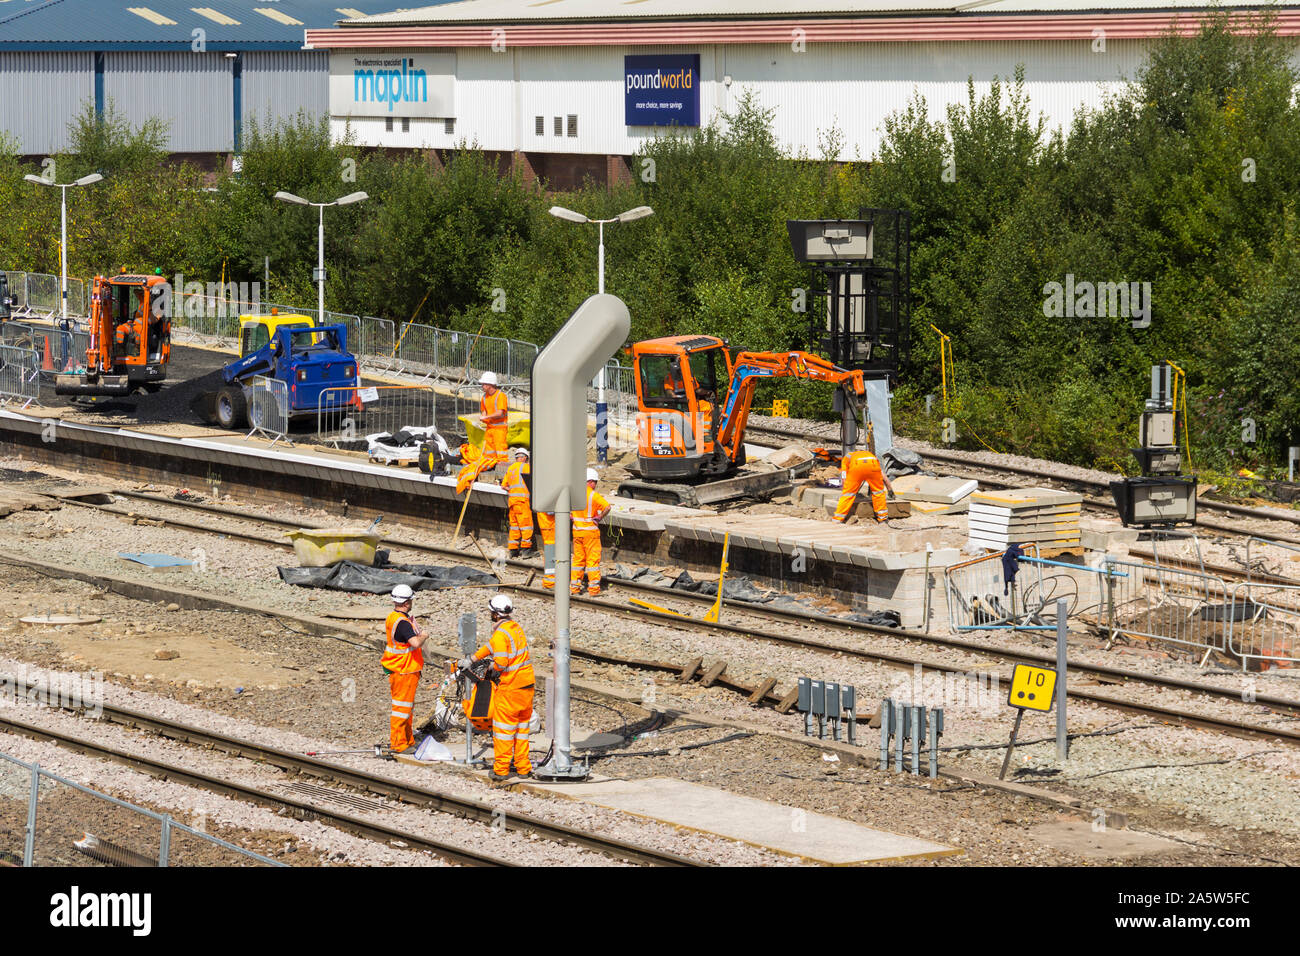 Construction work on platform 2 and new signalling equipment being installed during electrification and capacity extension at Bolton railway station. Stock Photo